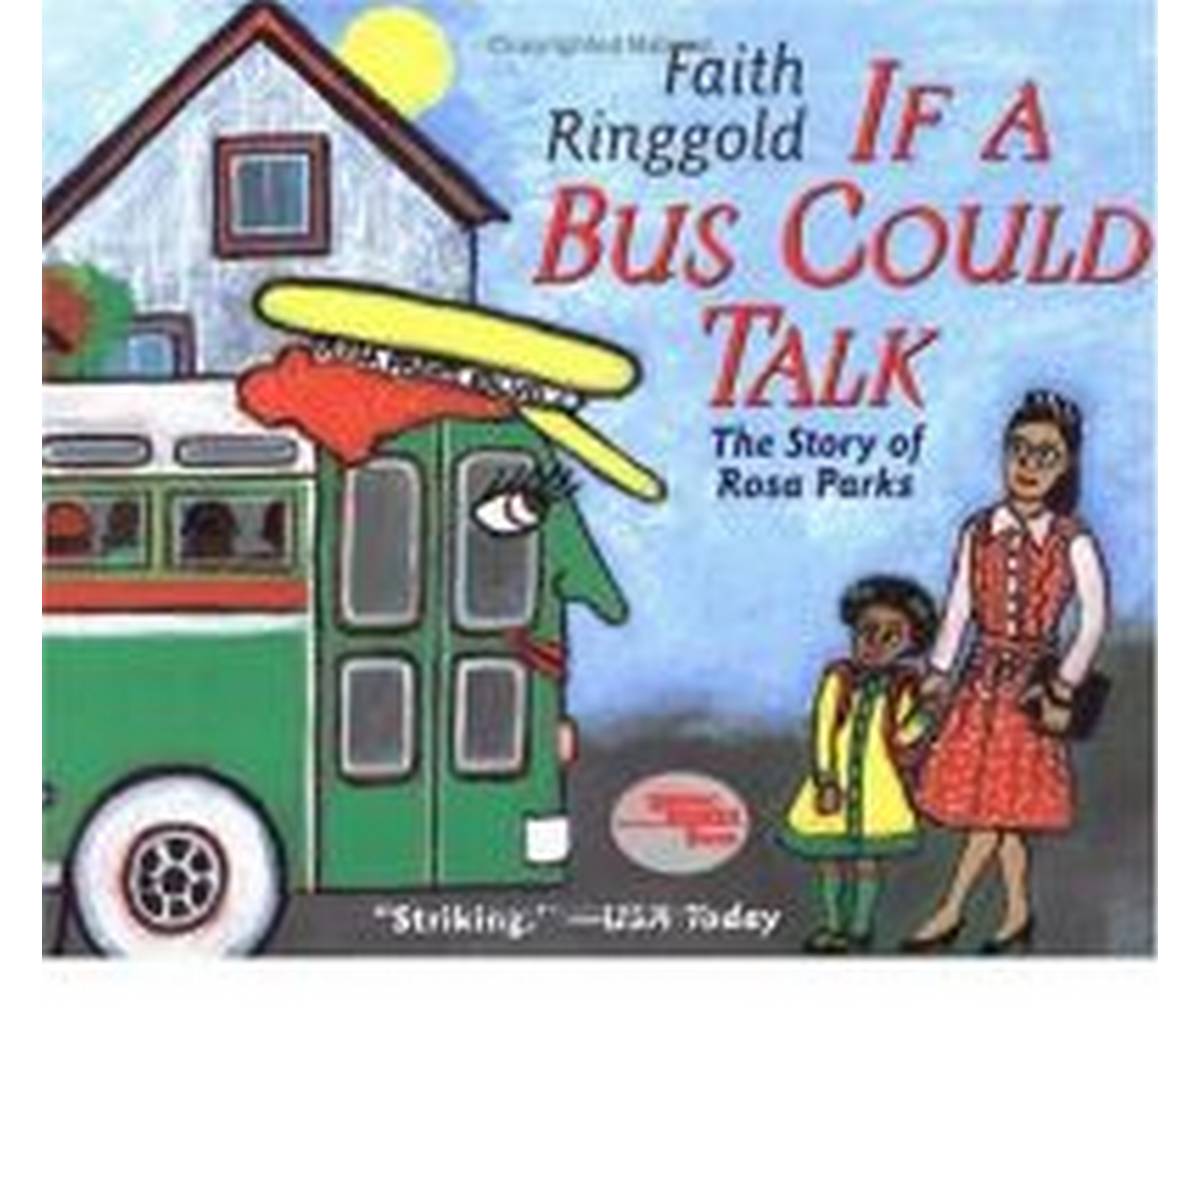 If A Bus Could Talk: The Story of Rosa Parks